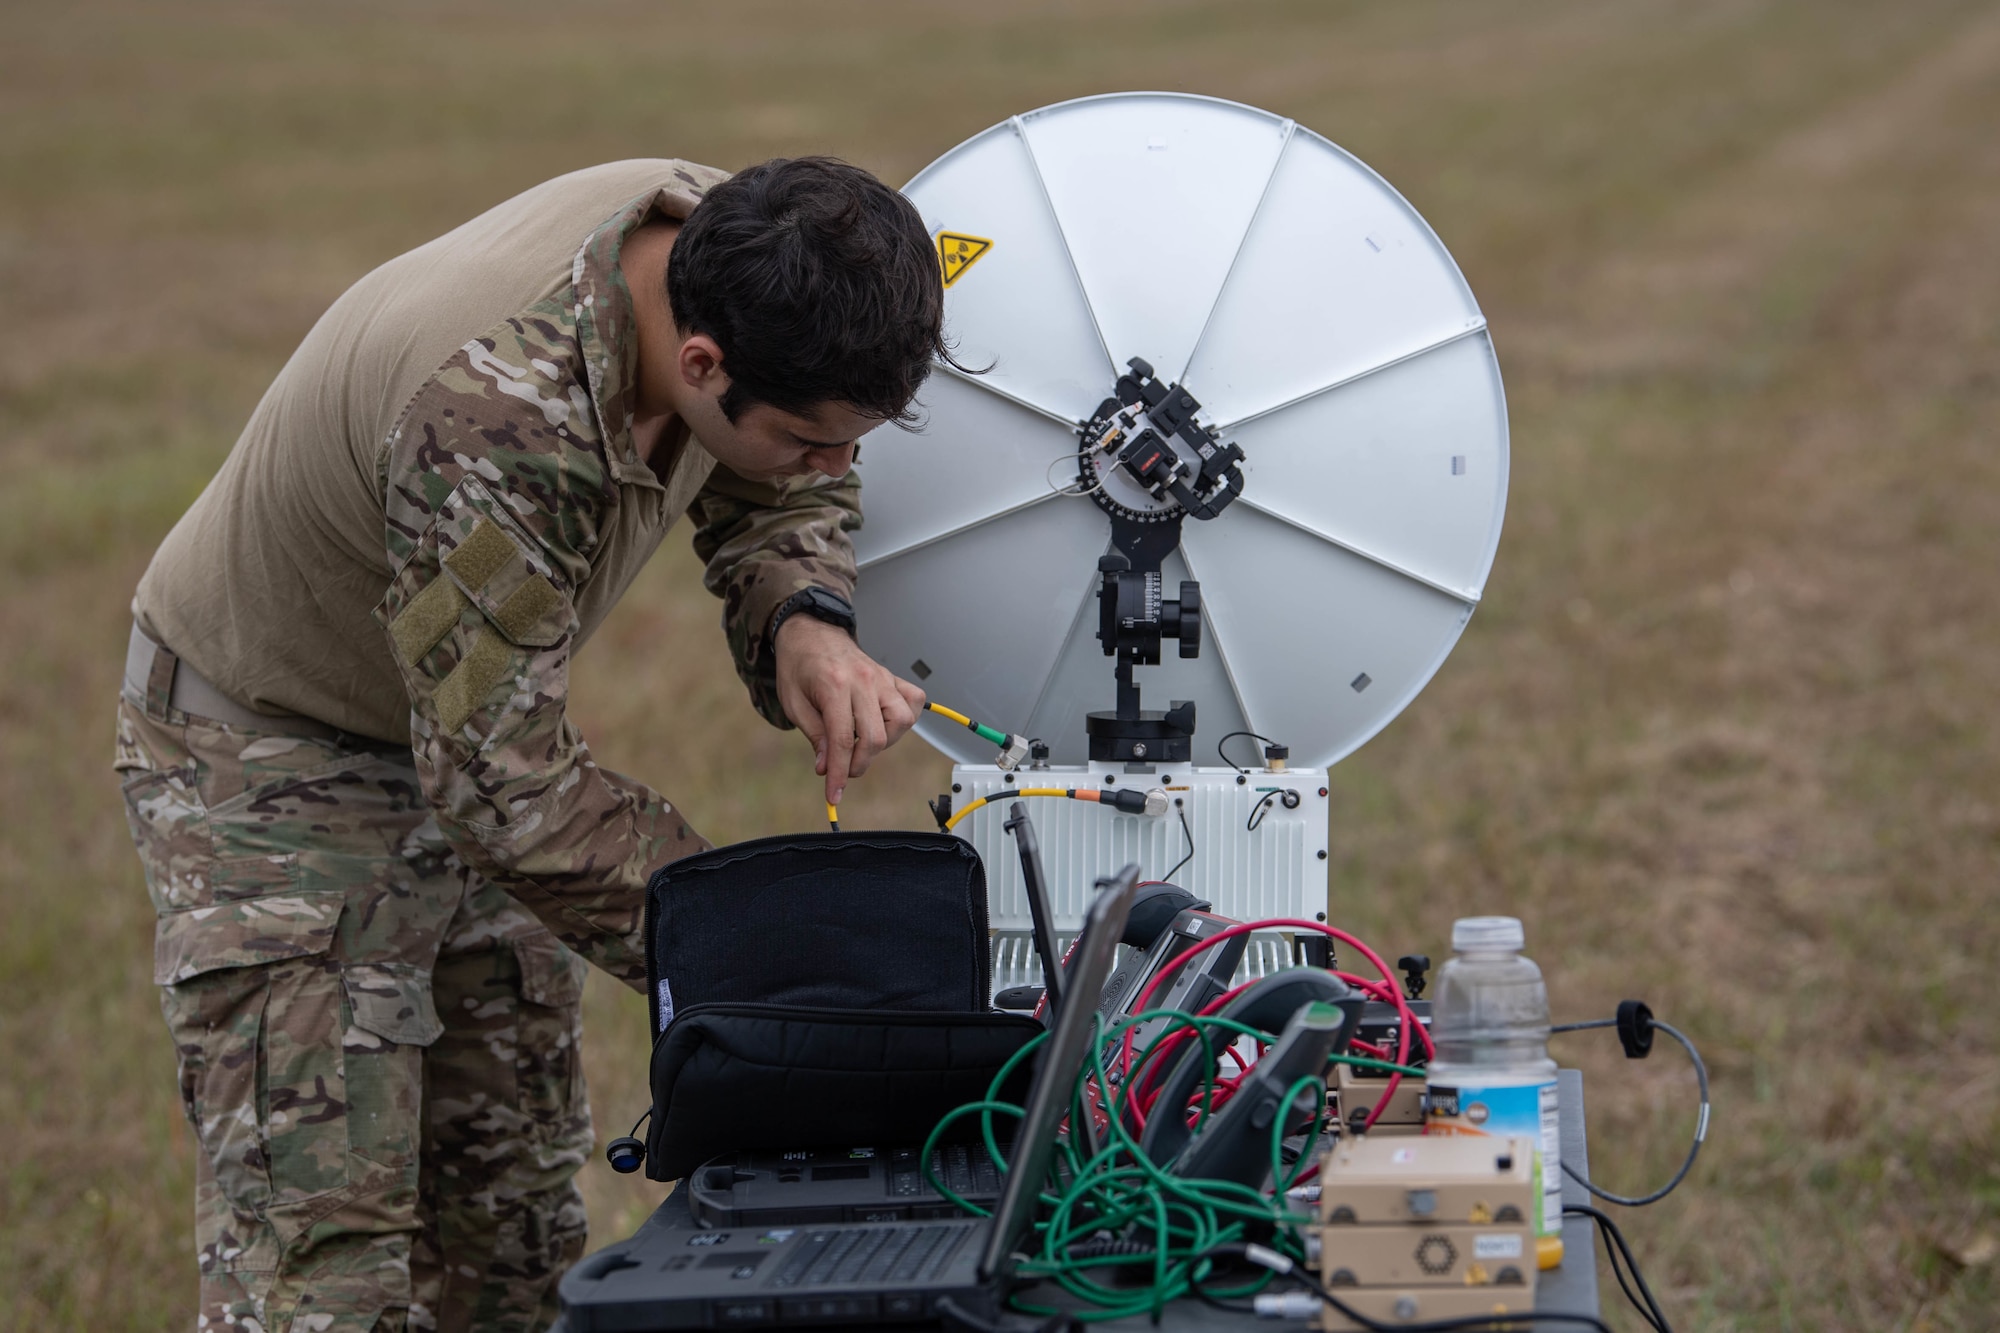 We are looking down a table at a small satellite dish pointing away from us. A Special Tactics operator is connecting radio equipment to the dish to aid communications during the disaster response exercise.